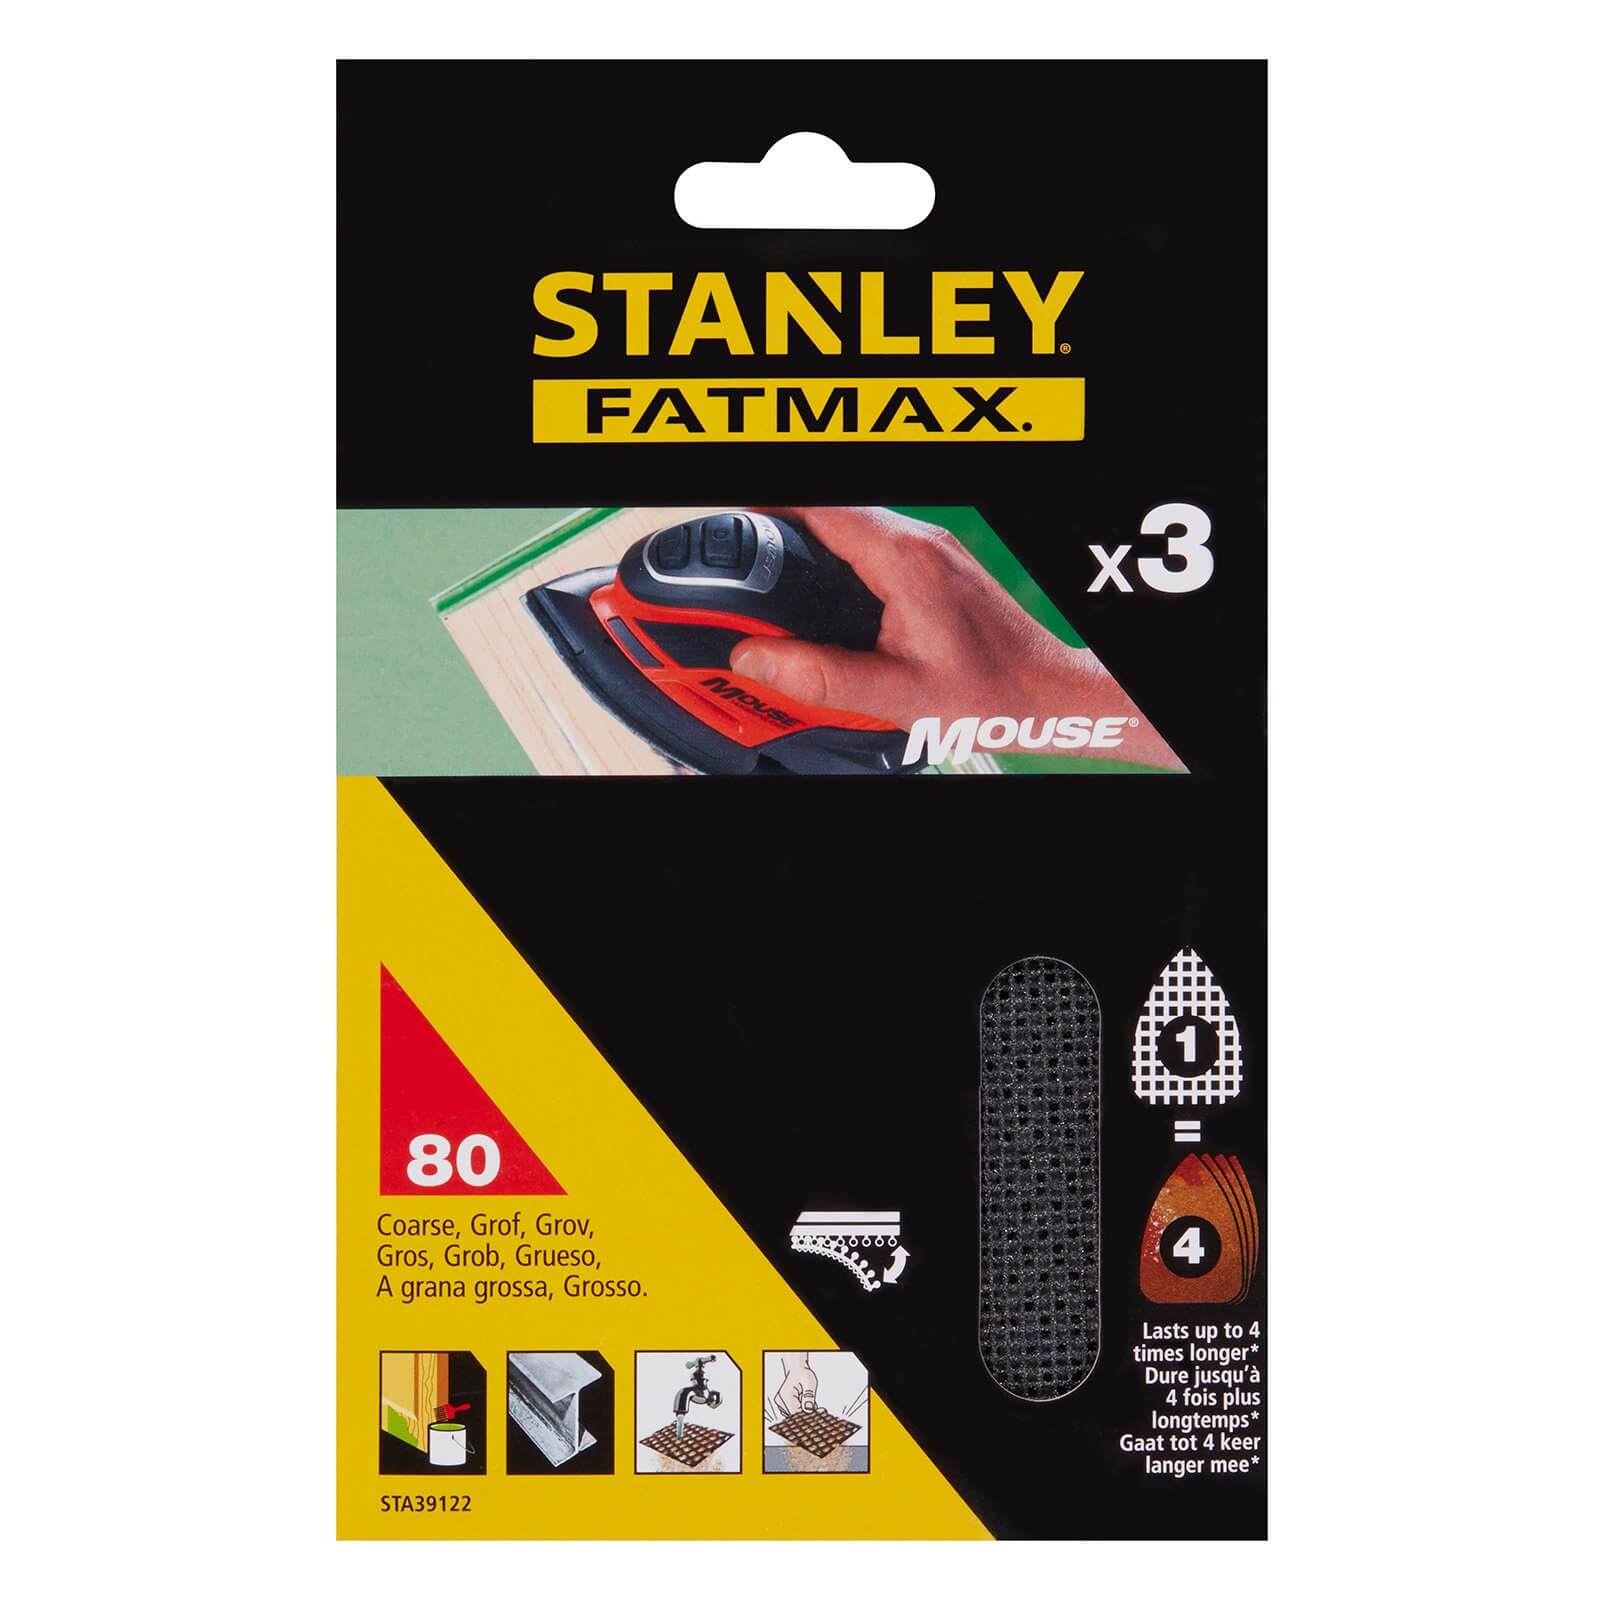 Photo of Stanley Fatmax - 3x 80g Mouse Mesh Sanding Sheets